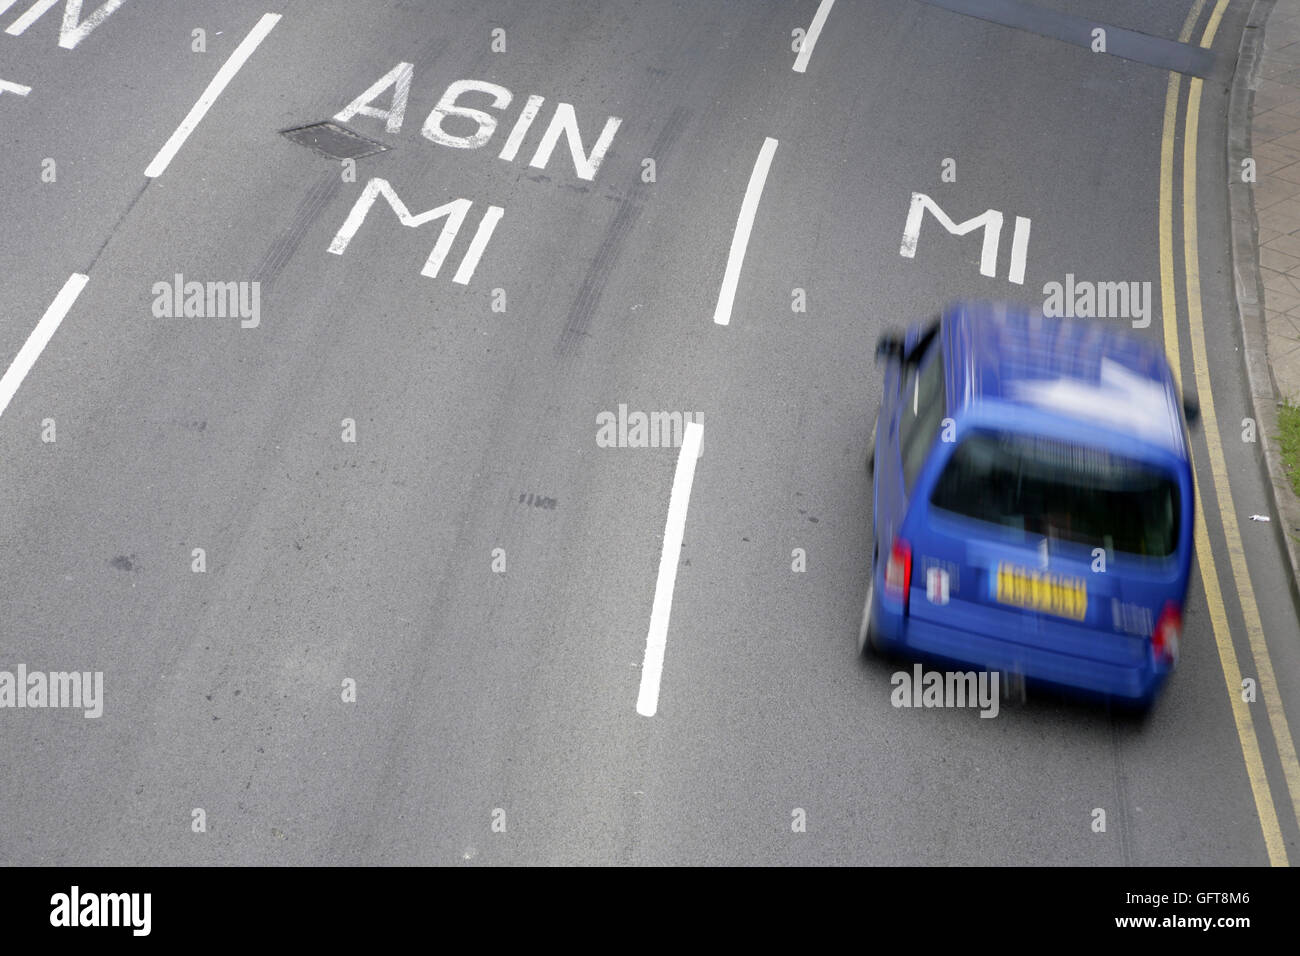 Car passing lane markings for the M1 motorway and A61, Sheffield, UK. Stock Photo